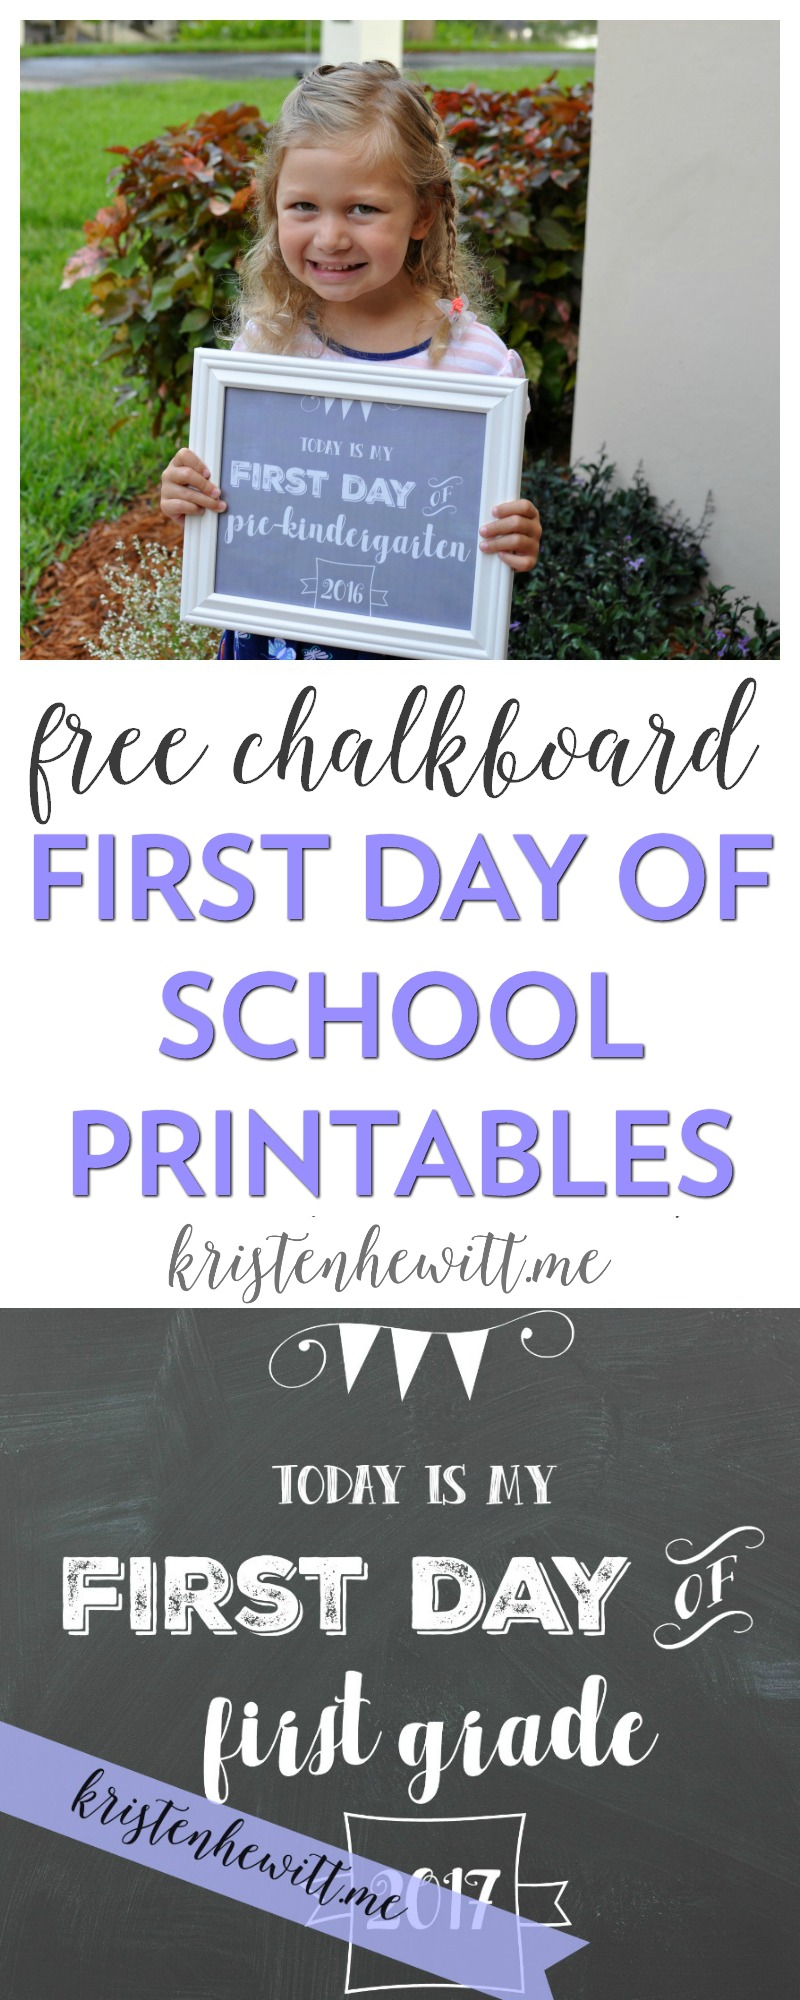 Looking for the perfect way to commemorate the first day of school? Print out one of these free chalkboard first day of school printables!